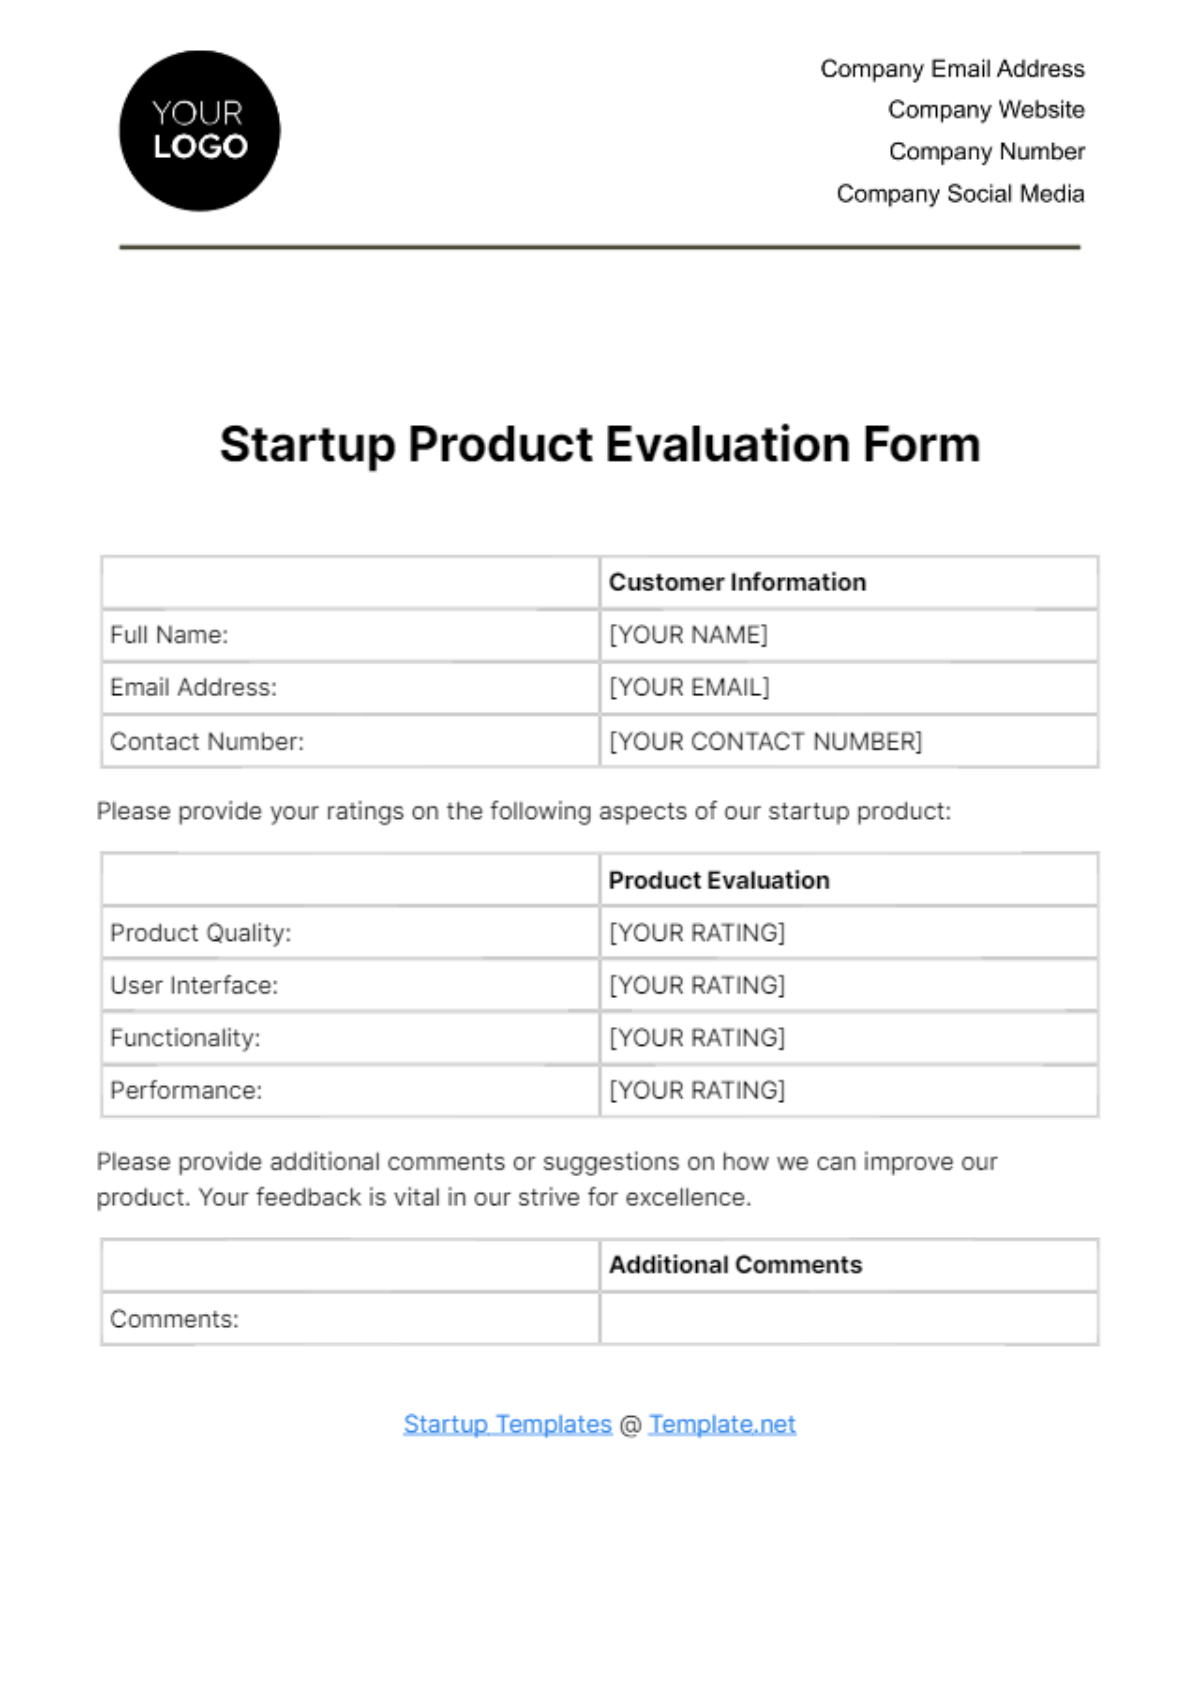 Free Startup Product Evaluation Form Template